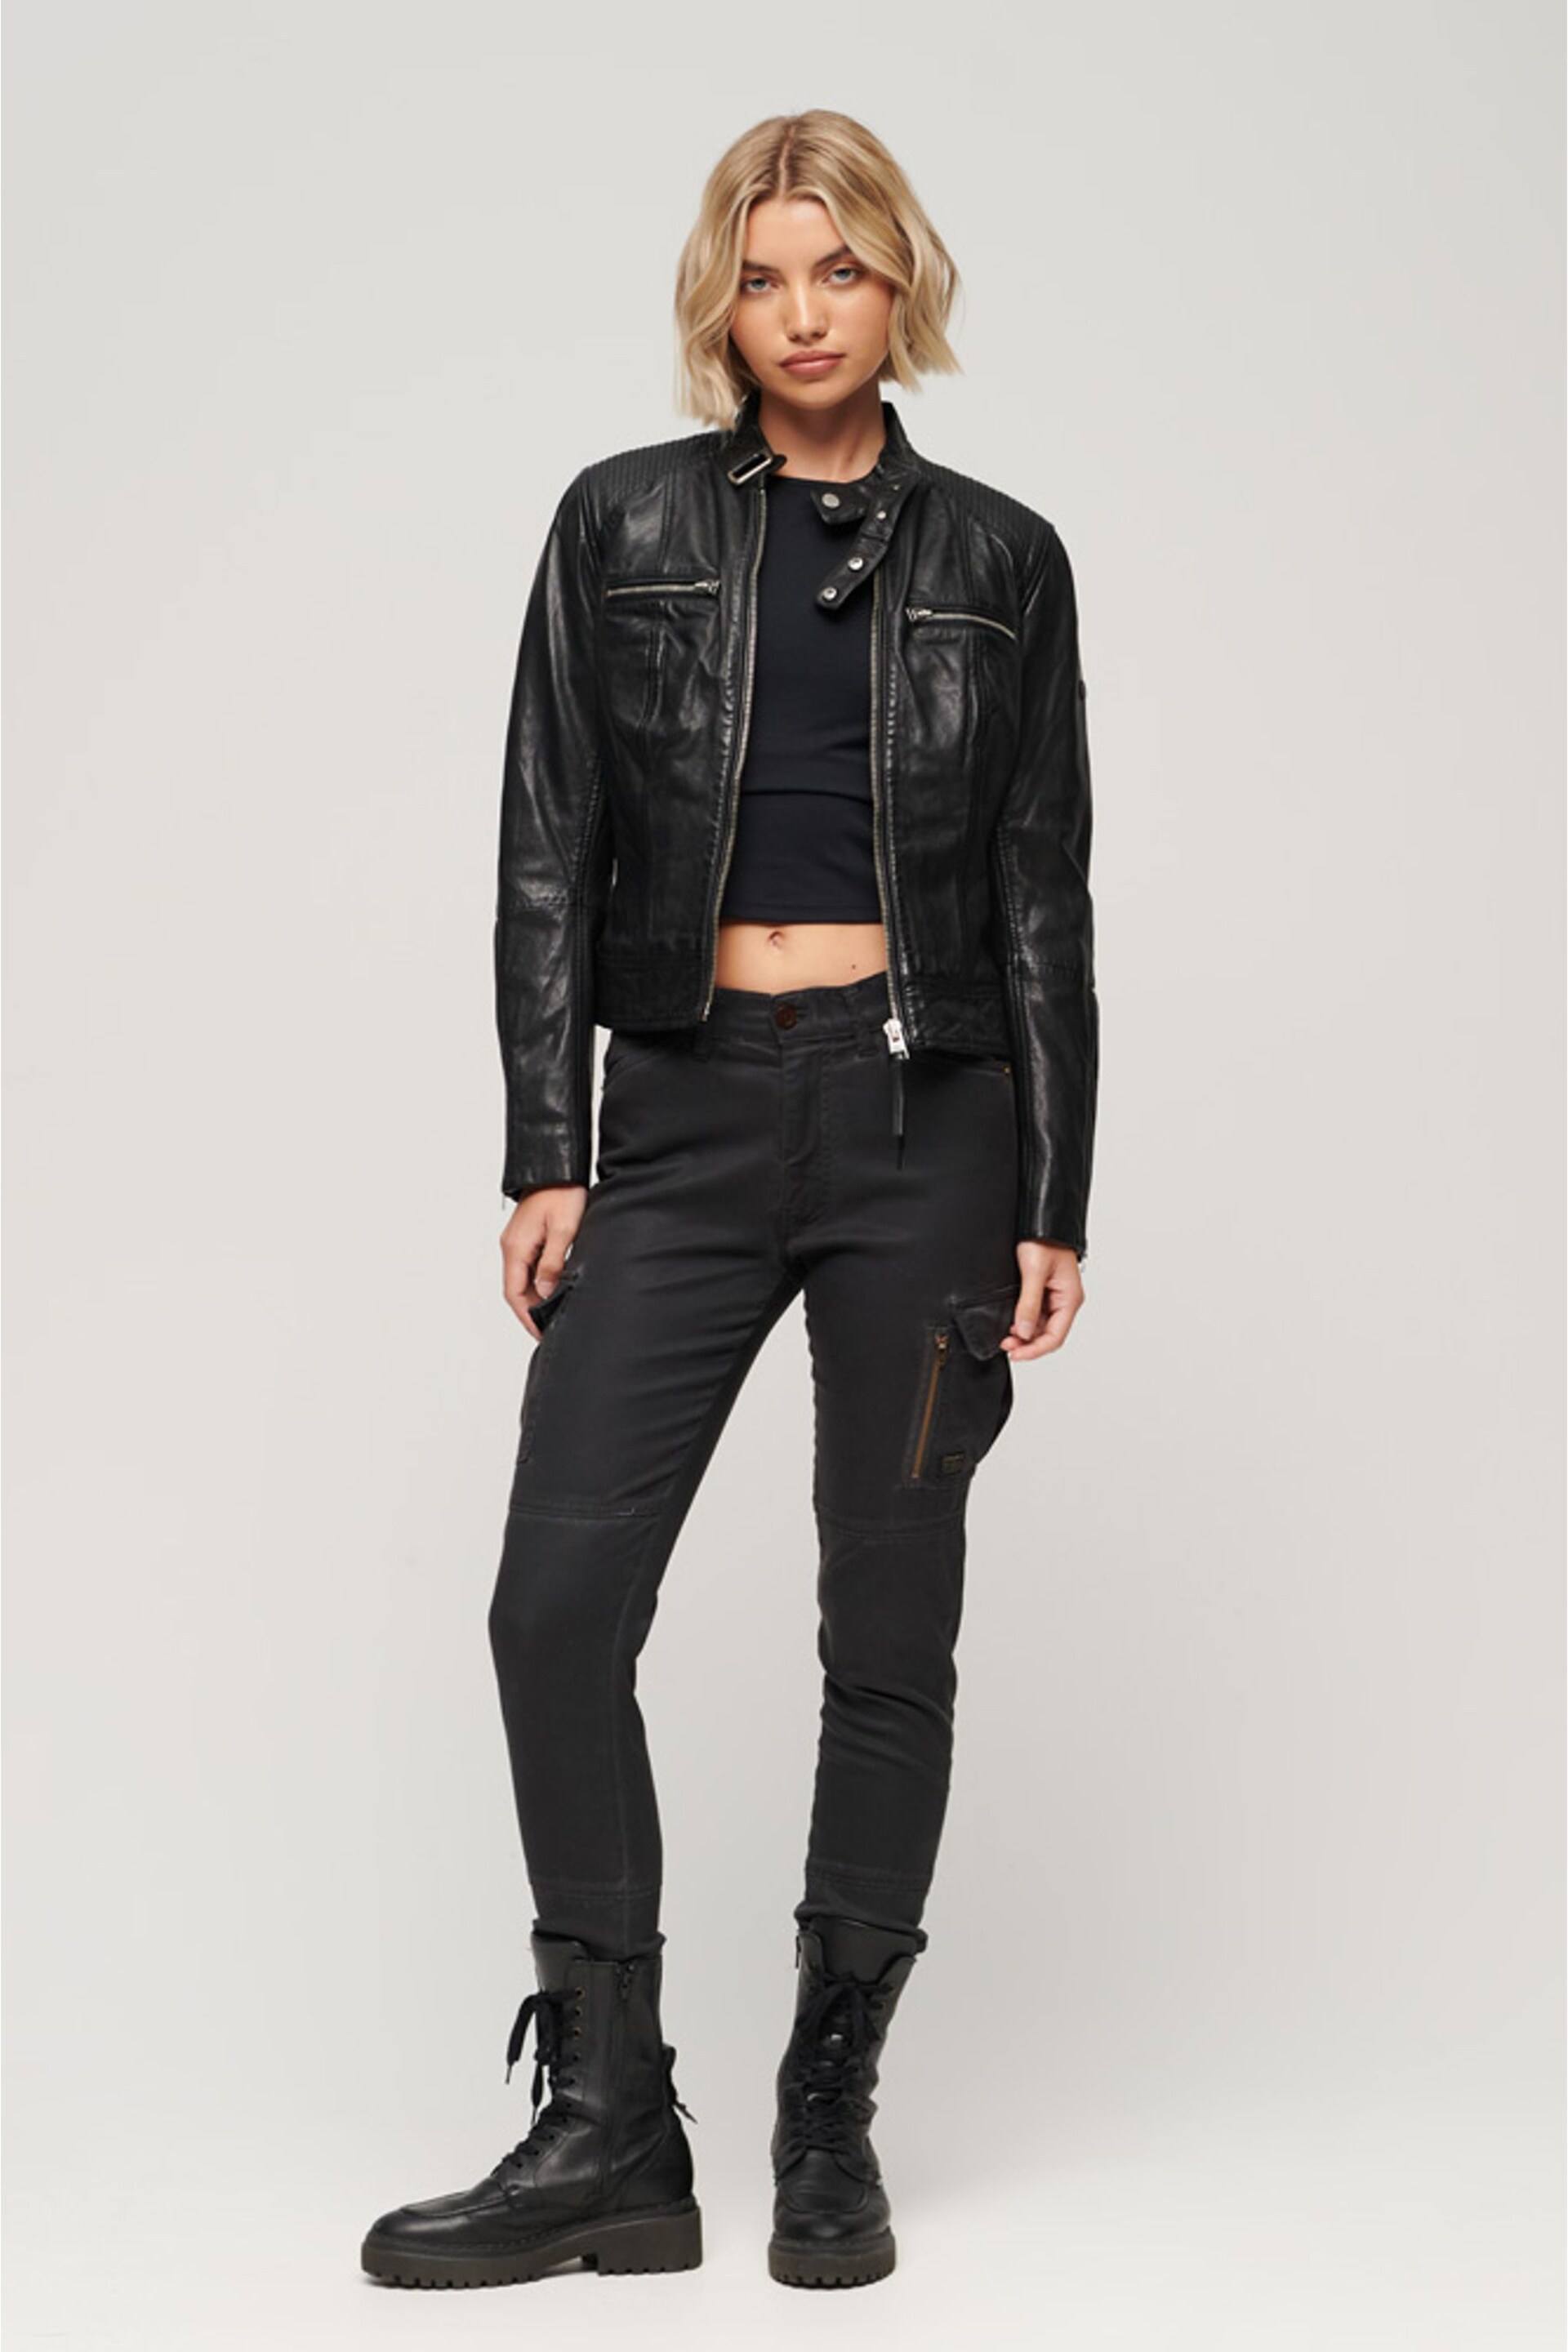 Superdry Black Fitted Leather Racer Jacket - Image 3 of 6